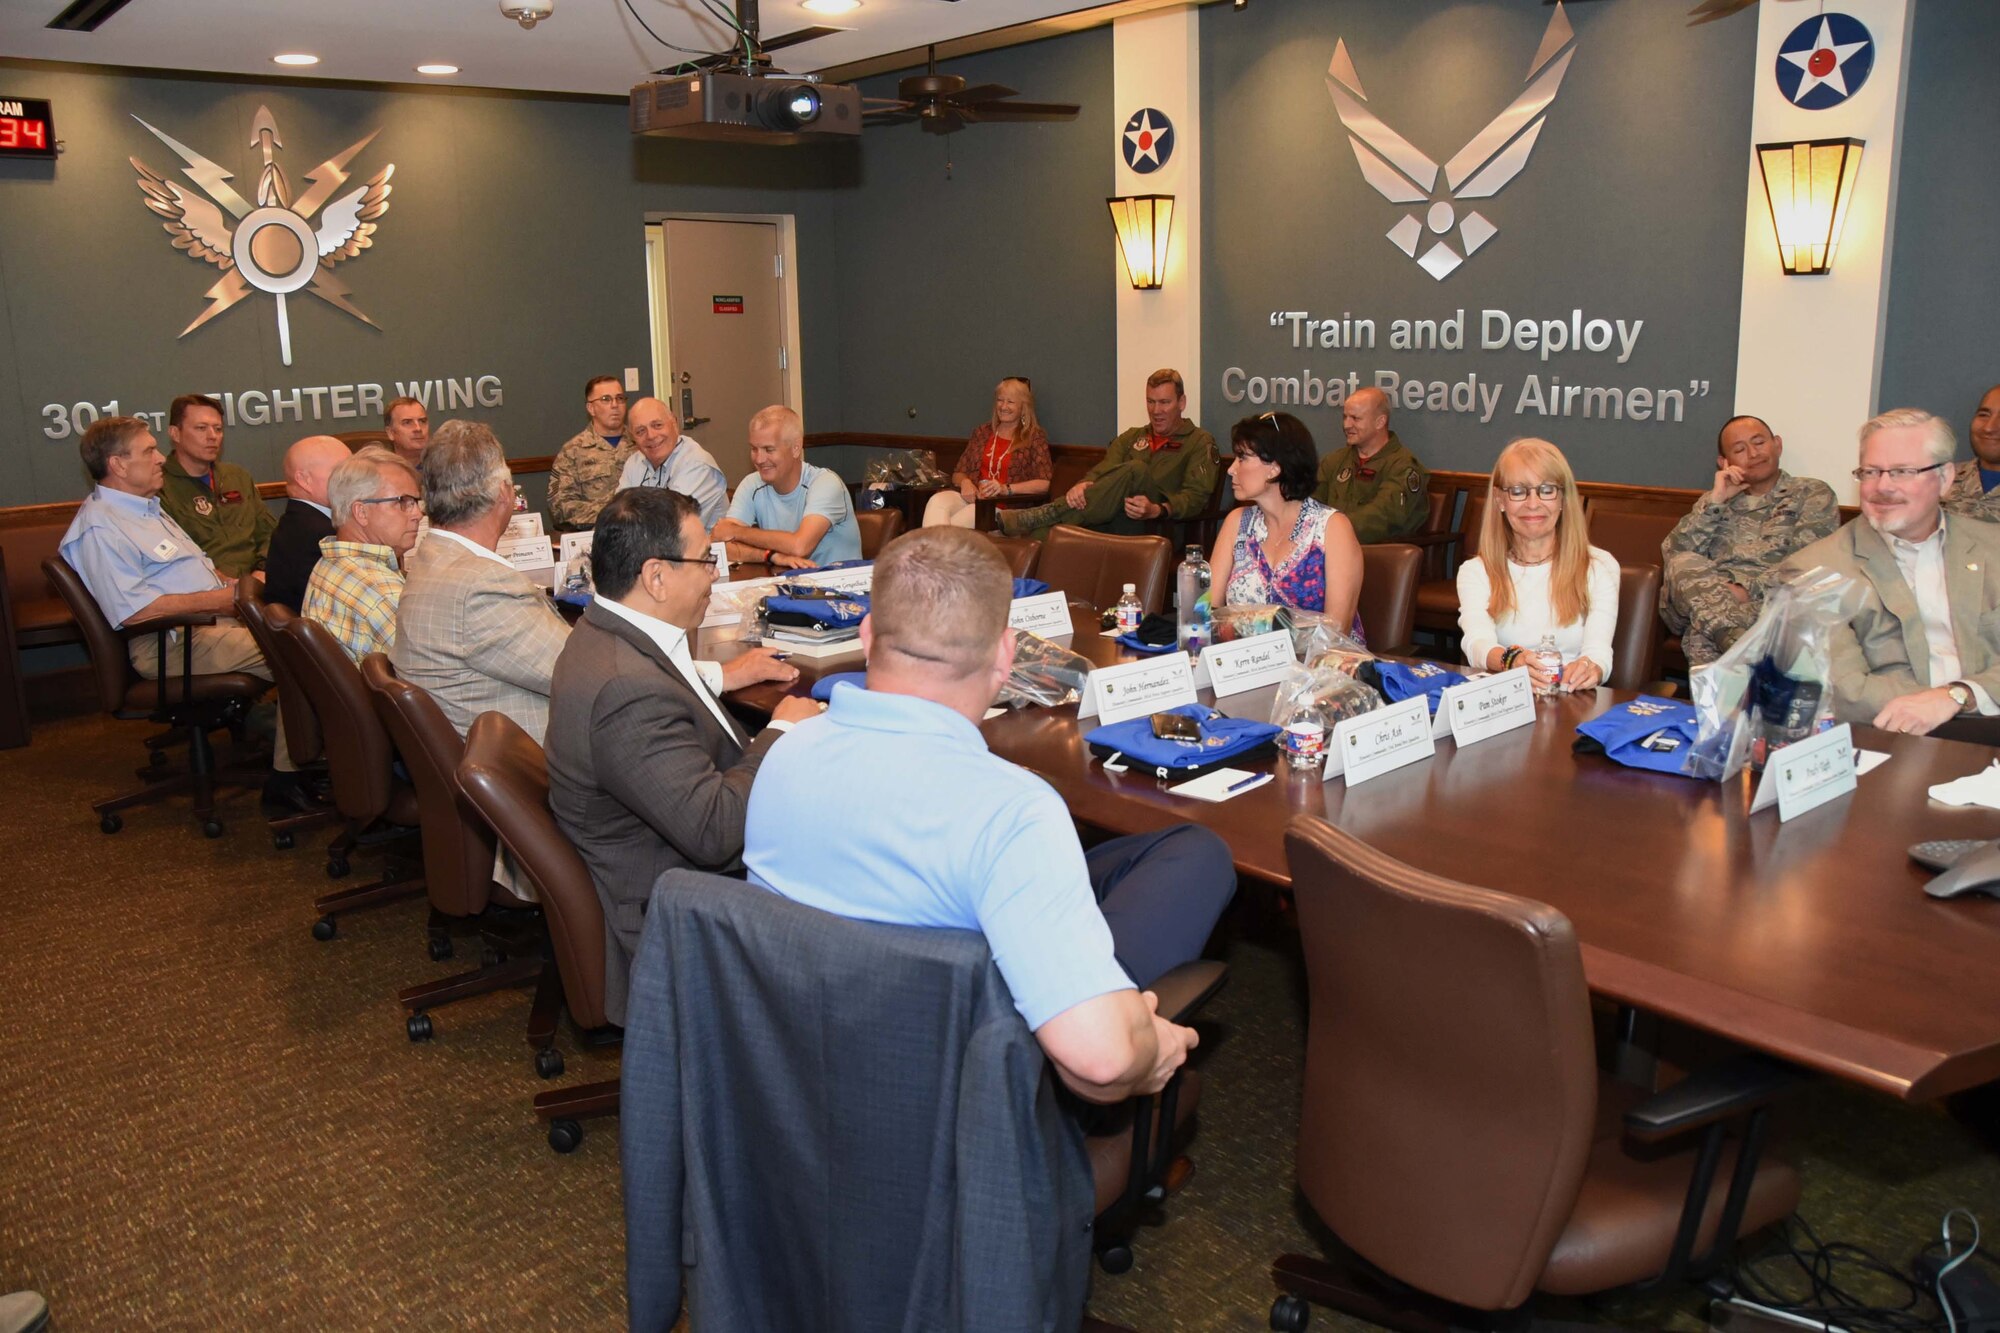 Community leaders gather for a briefing by 
Col. Gregory C. Jones, 301st Fighter Wing commander, May 18, 2018, at Naval Air Station Fort Worth Joint Reserve Base, Texas. The event's goal was to enhance the understanding of the wing's mission and capabilities for those recently inducted into the Honorary Commanders' Program. (U.S. Air Force photo by Tech. Sgt. Charles Taylor)